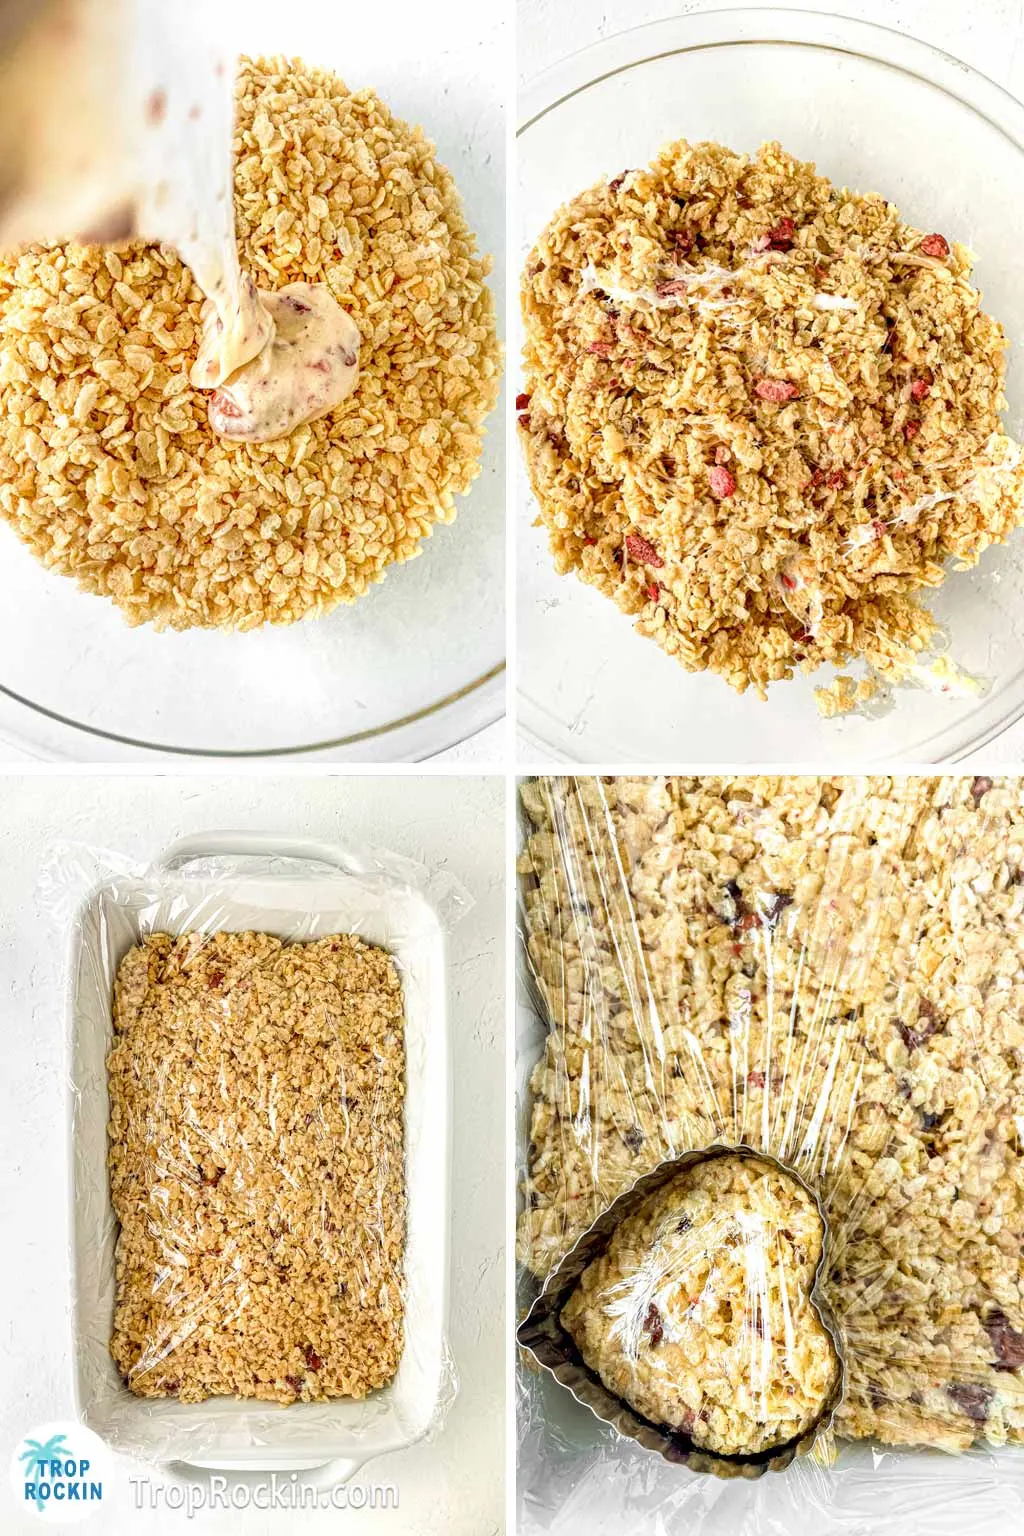 Four photo collage making rice krispie cereal treats. Top Right photo is pouring the melted marshmallow mixture over a large bowl of ricke krispies, Top left is completely mixed together rice krispies and marshmallow mixture. Bottom left is mixture evenly patted down in a 9x13 inch baking pan. Bottom right is added plastic wrap over the rice krispie treats with a heart cookie cutter on top ready to push down to make the heart shaped treats.